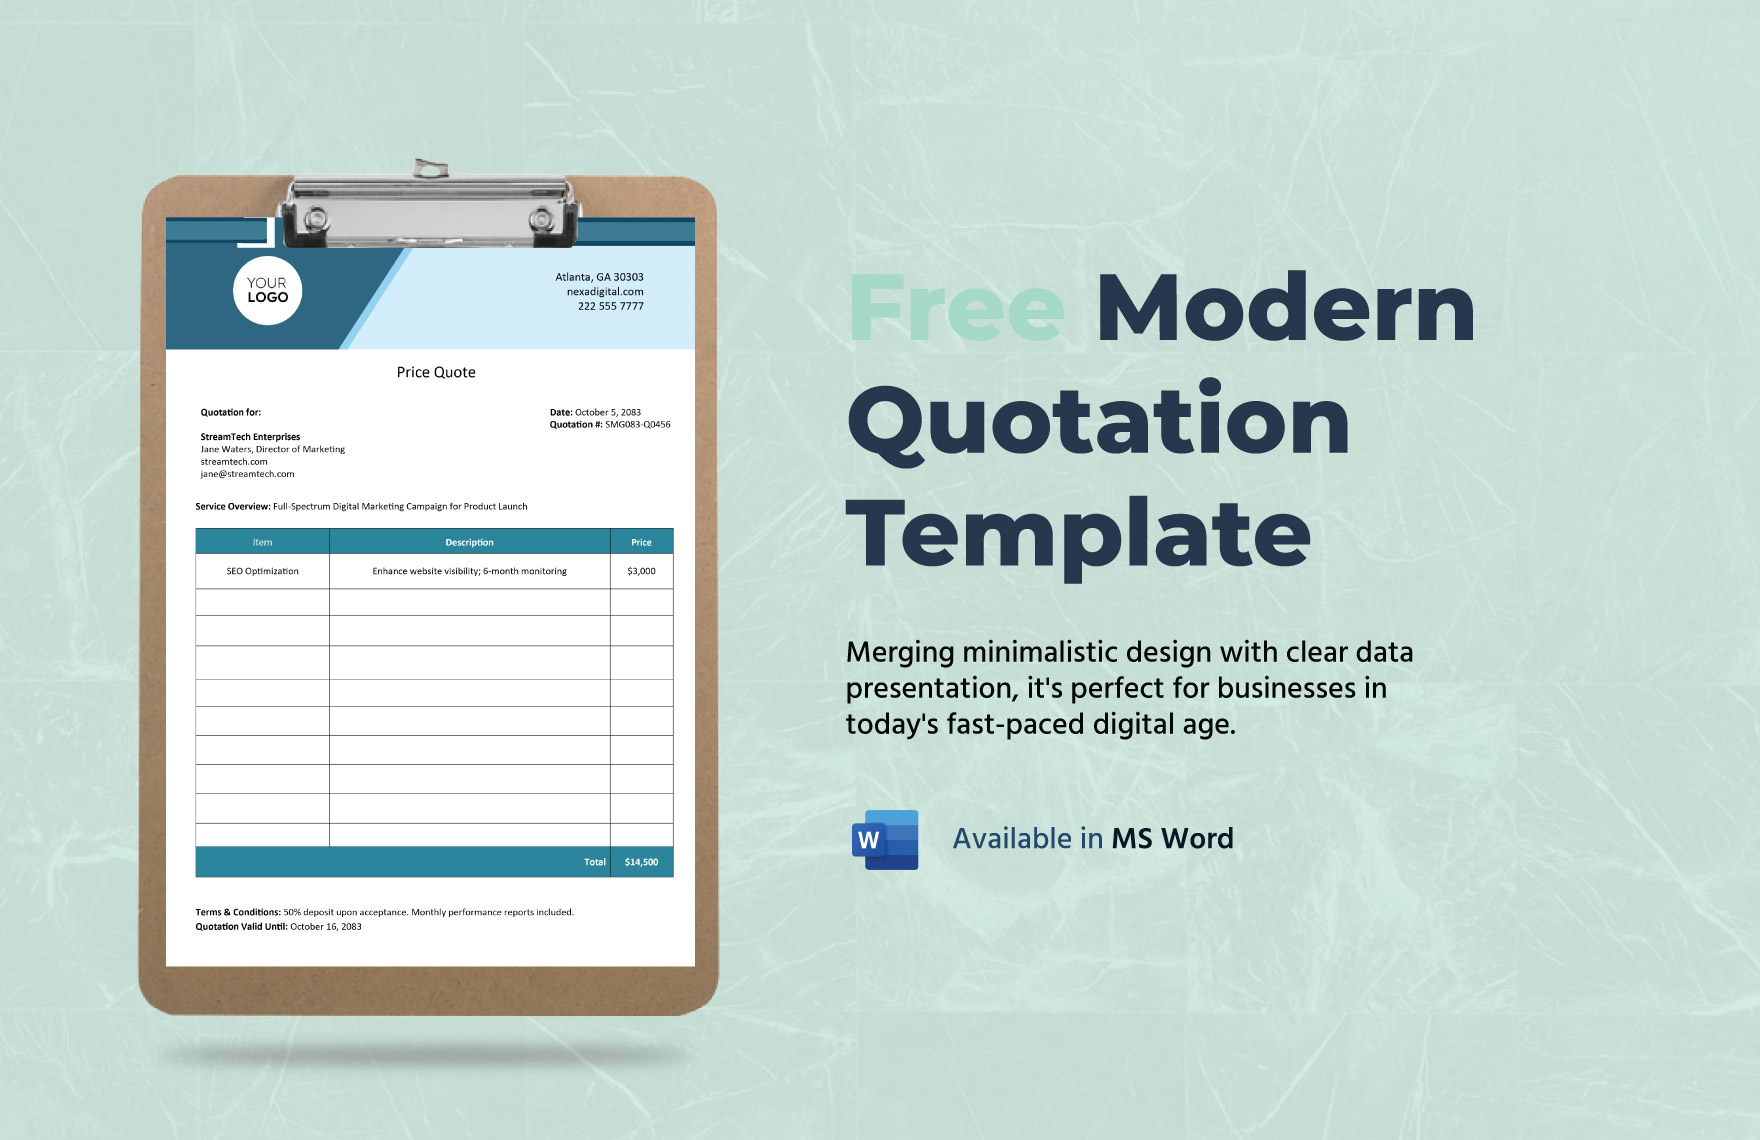 Free Modern Quotation Template